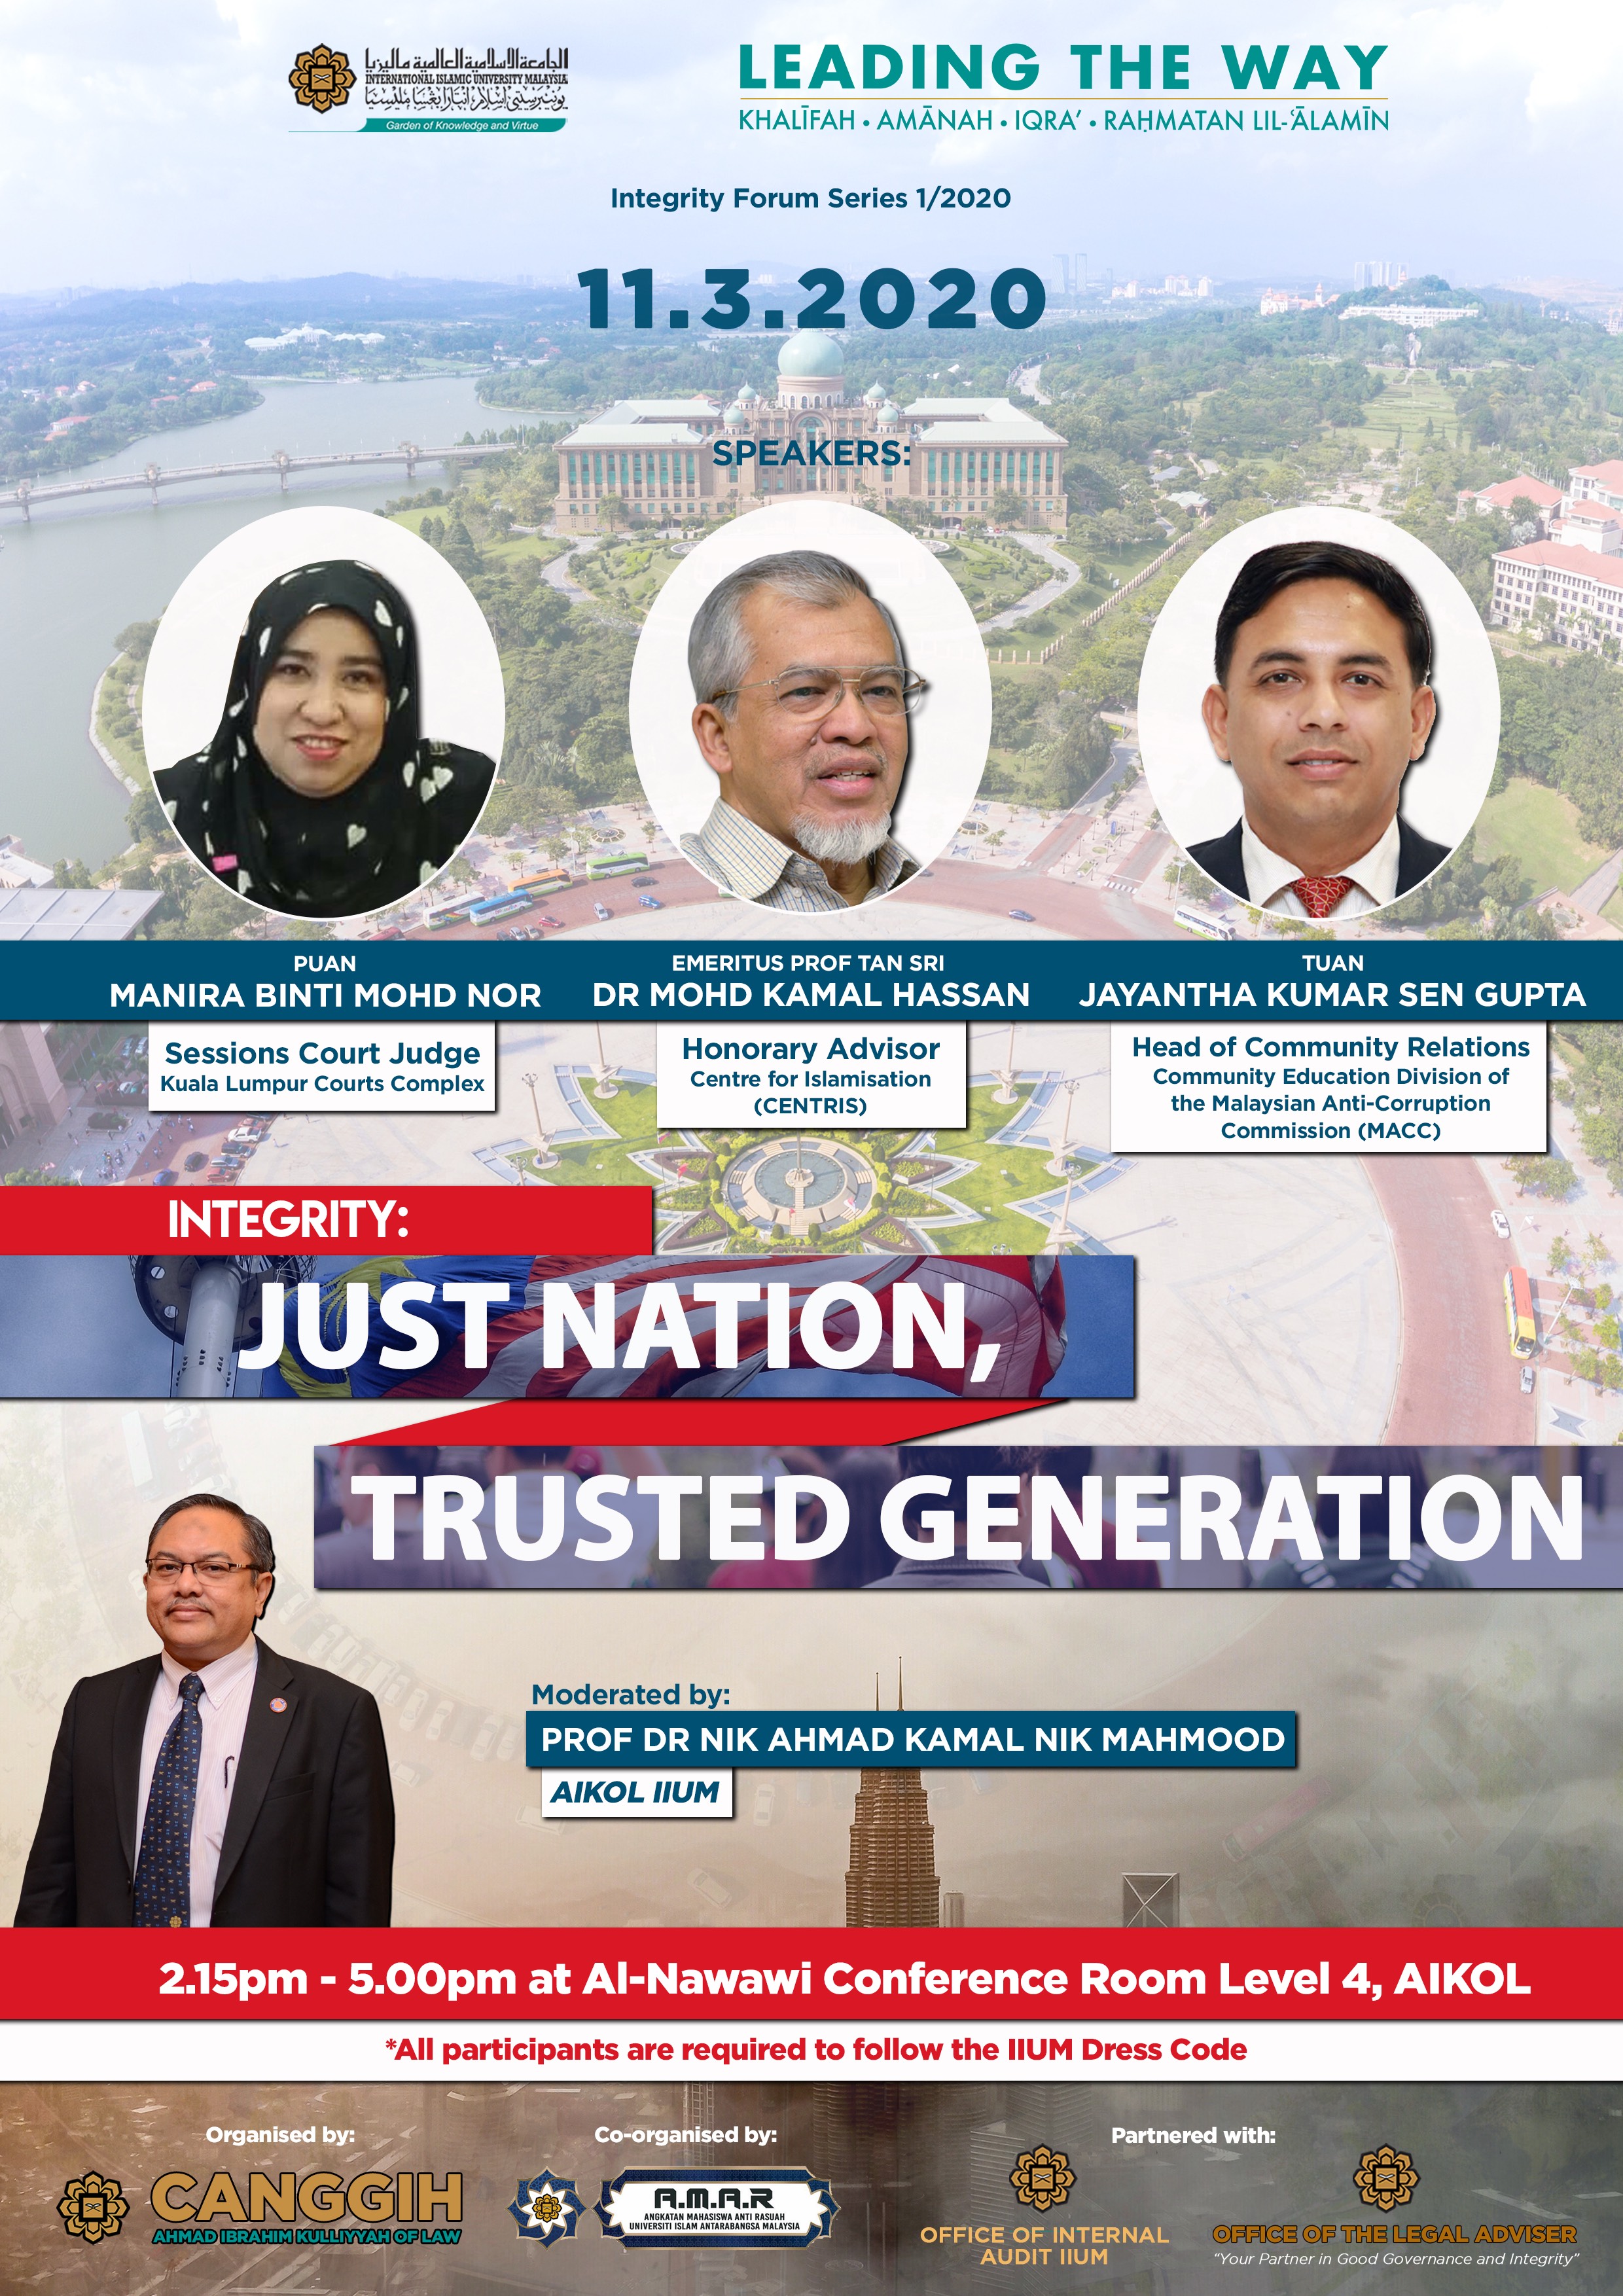 INTEGRITY FORUM 1/2020: JUST NATION, TRUSTED GENERATION